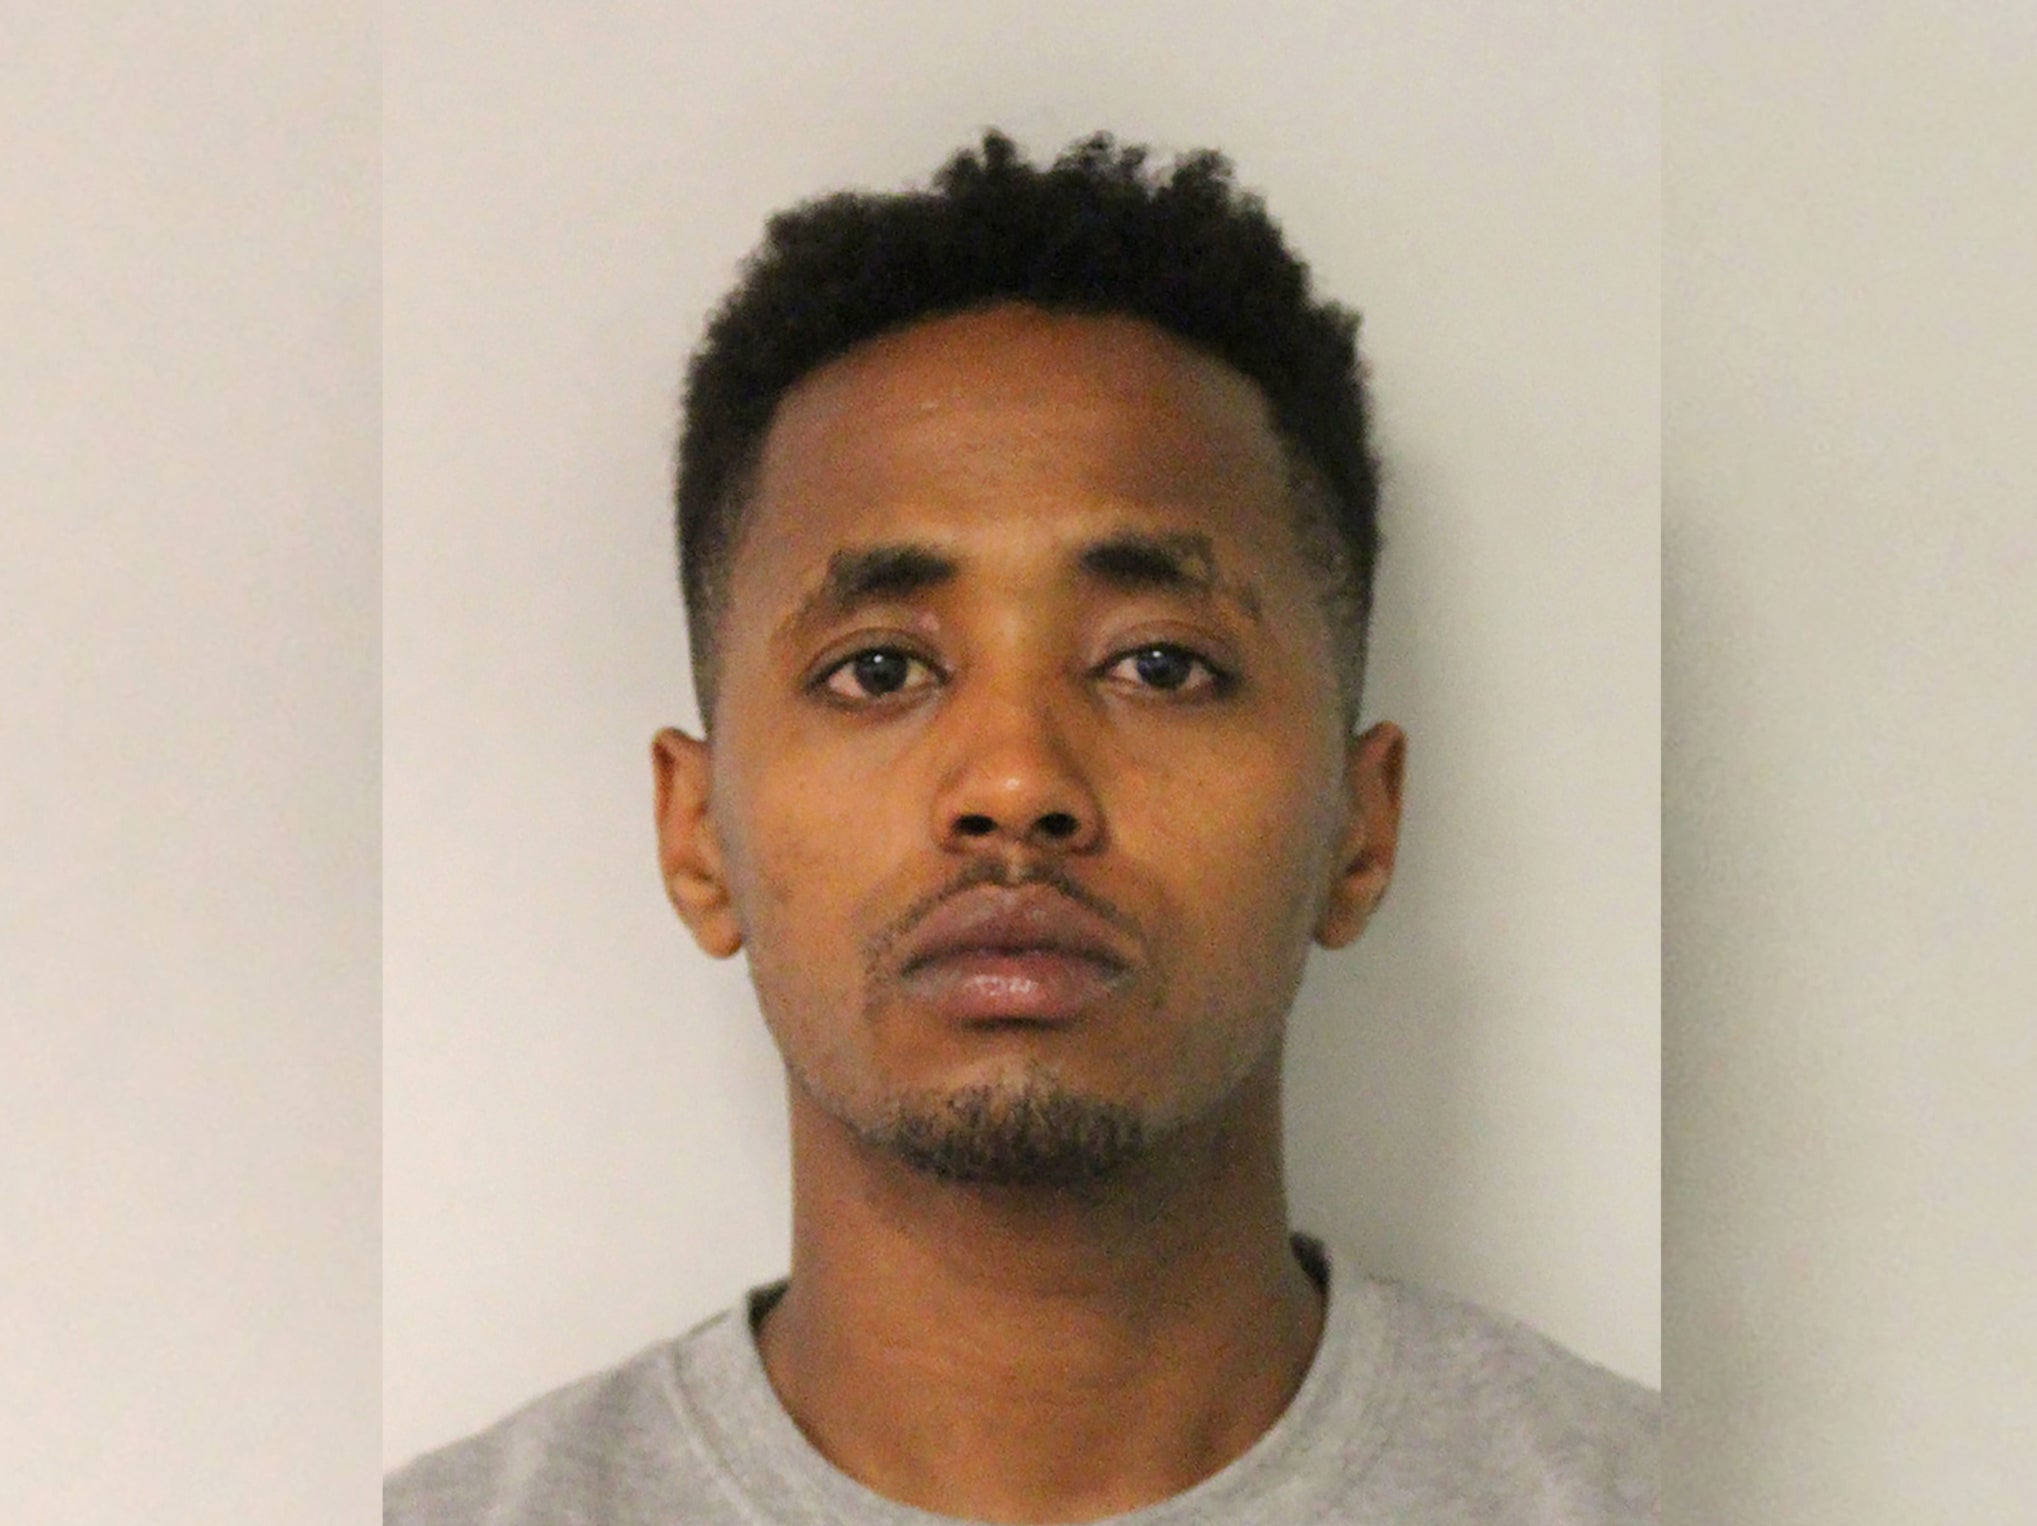 Abel Berhany, 23 and from Leyton, east London, will serve a minimum of 18 years for the brutal and fatal attack